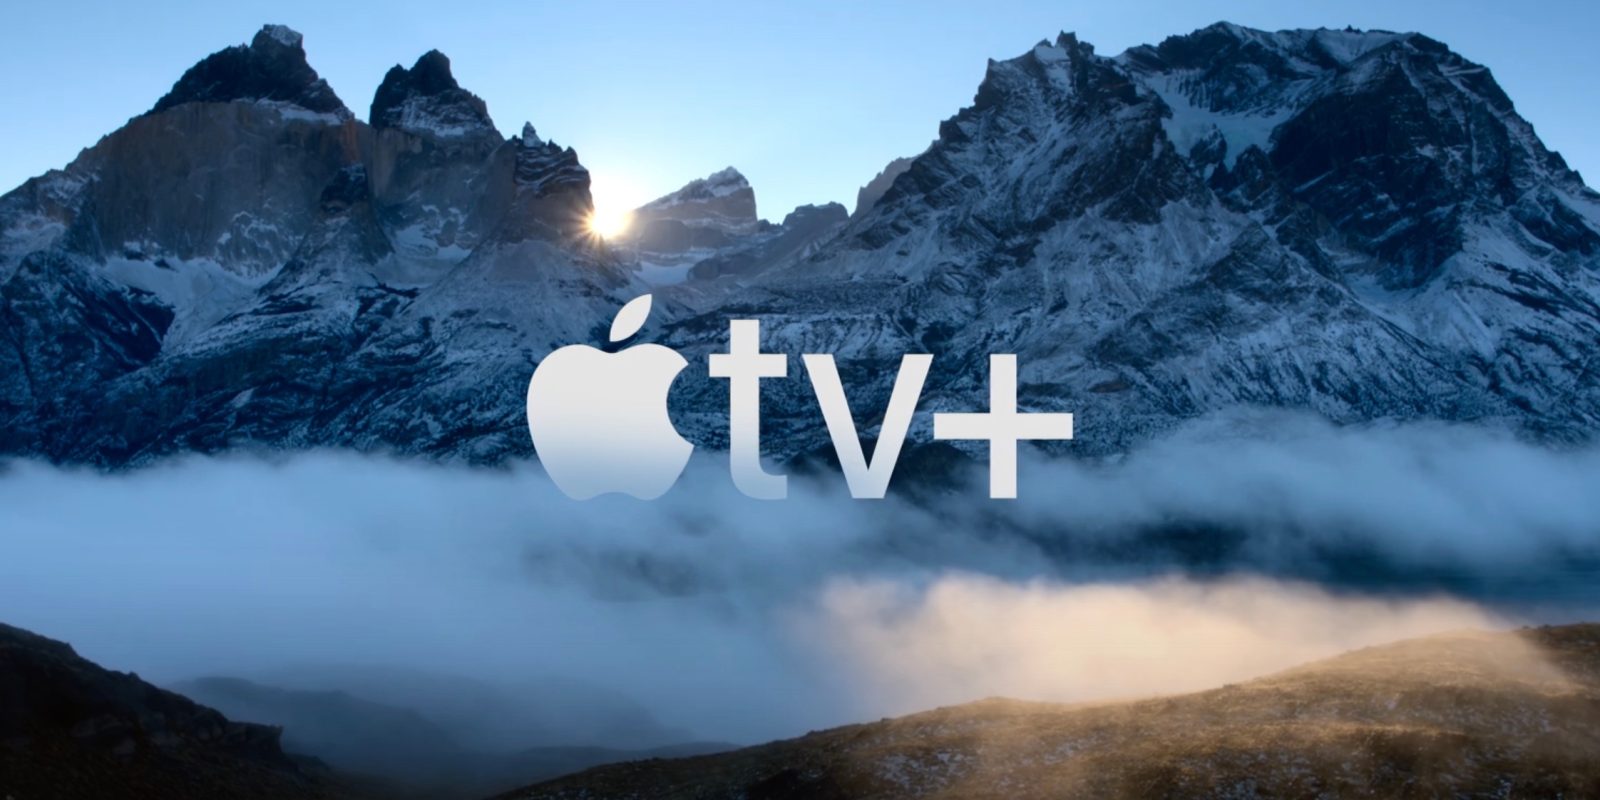 Apple TV+ market share grows in the US while Netflix loses ground to its competitors